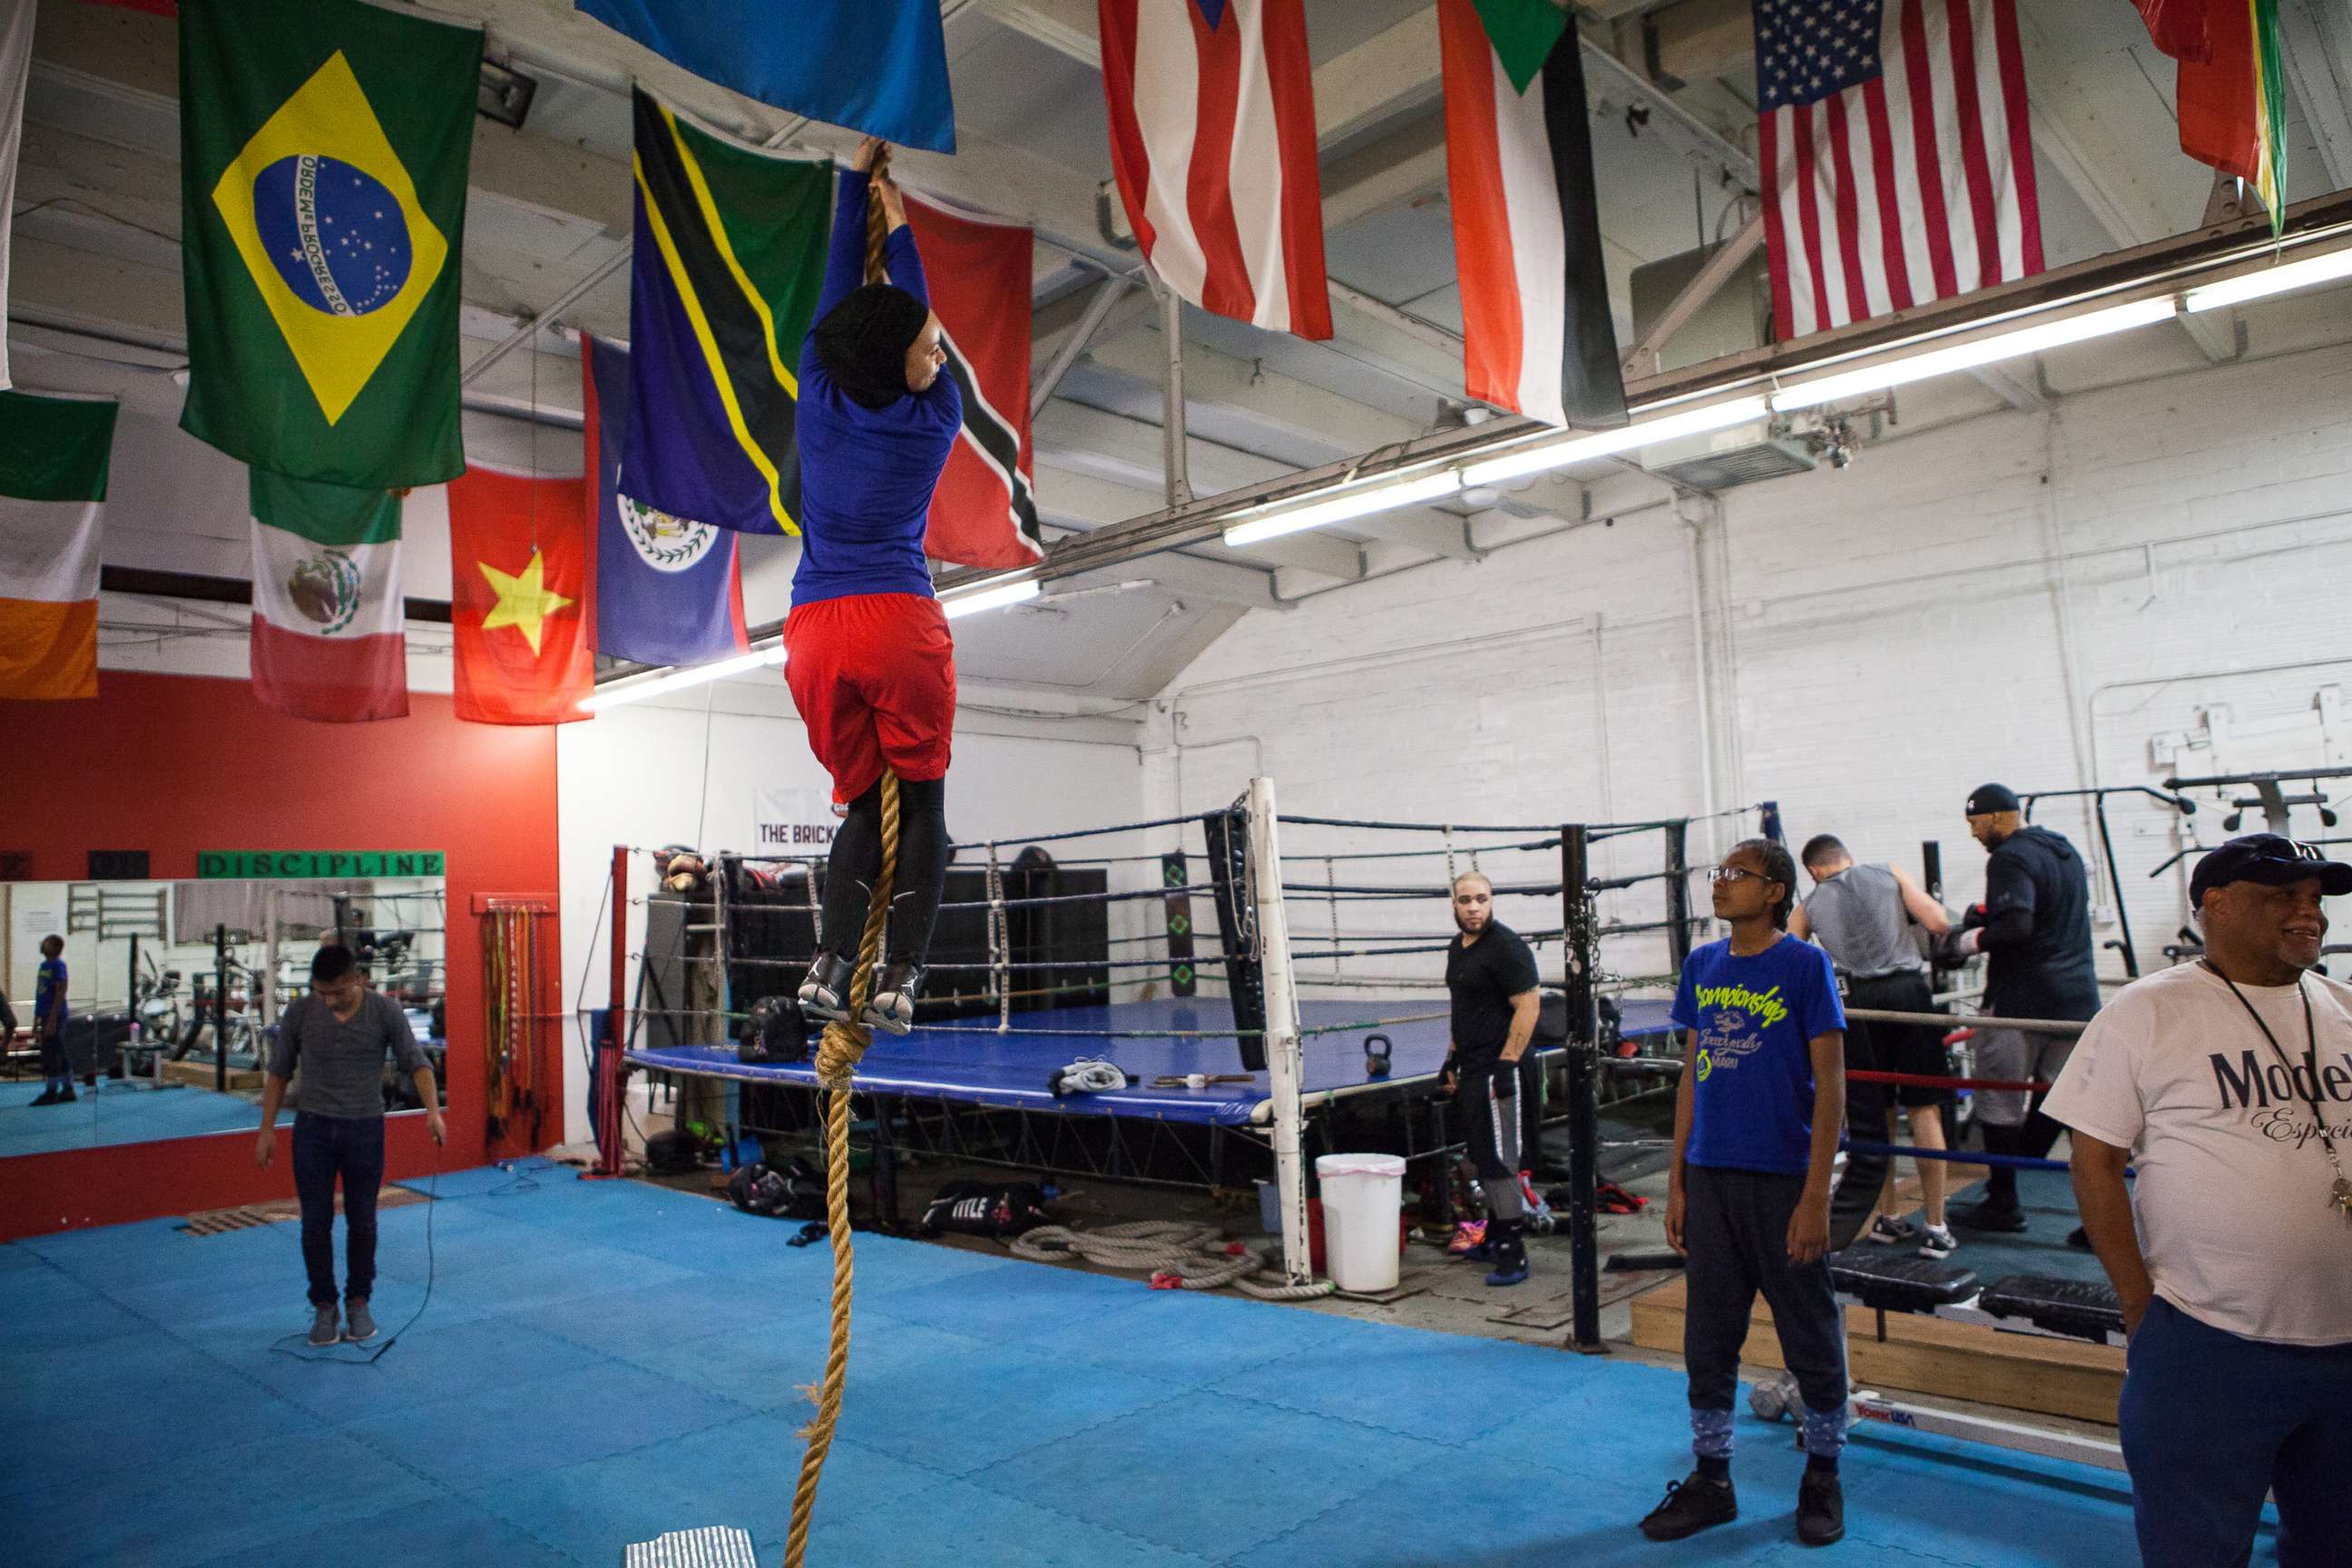 PHOTO: Amaiya Zafar attempts to climb the rope and touch the ceiling at Circle of Discipline boxing gym in Minneapolis.